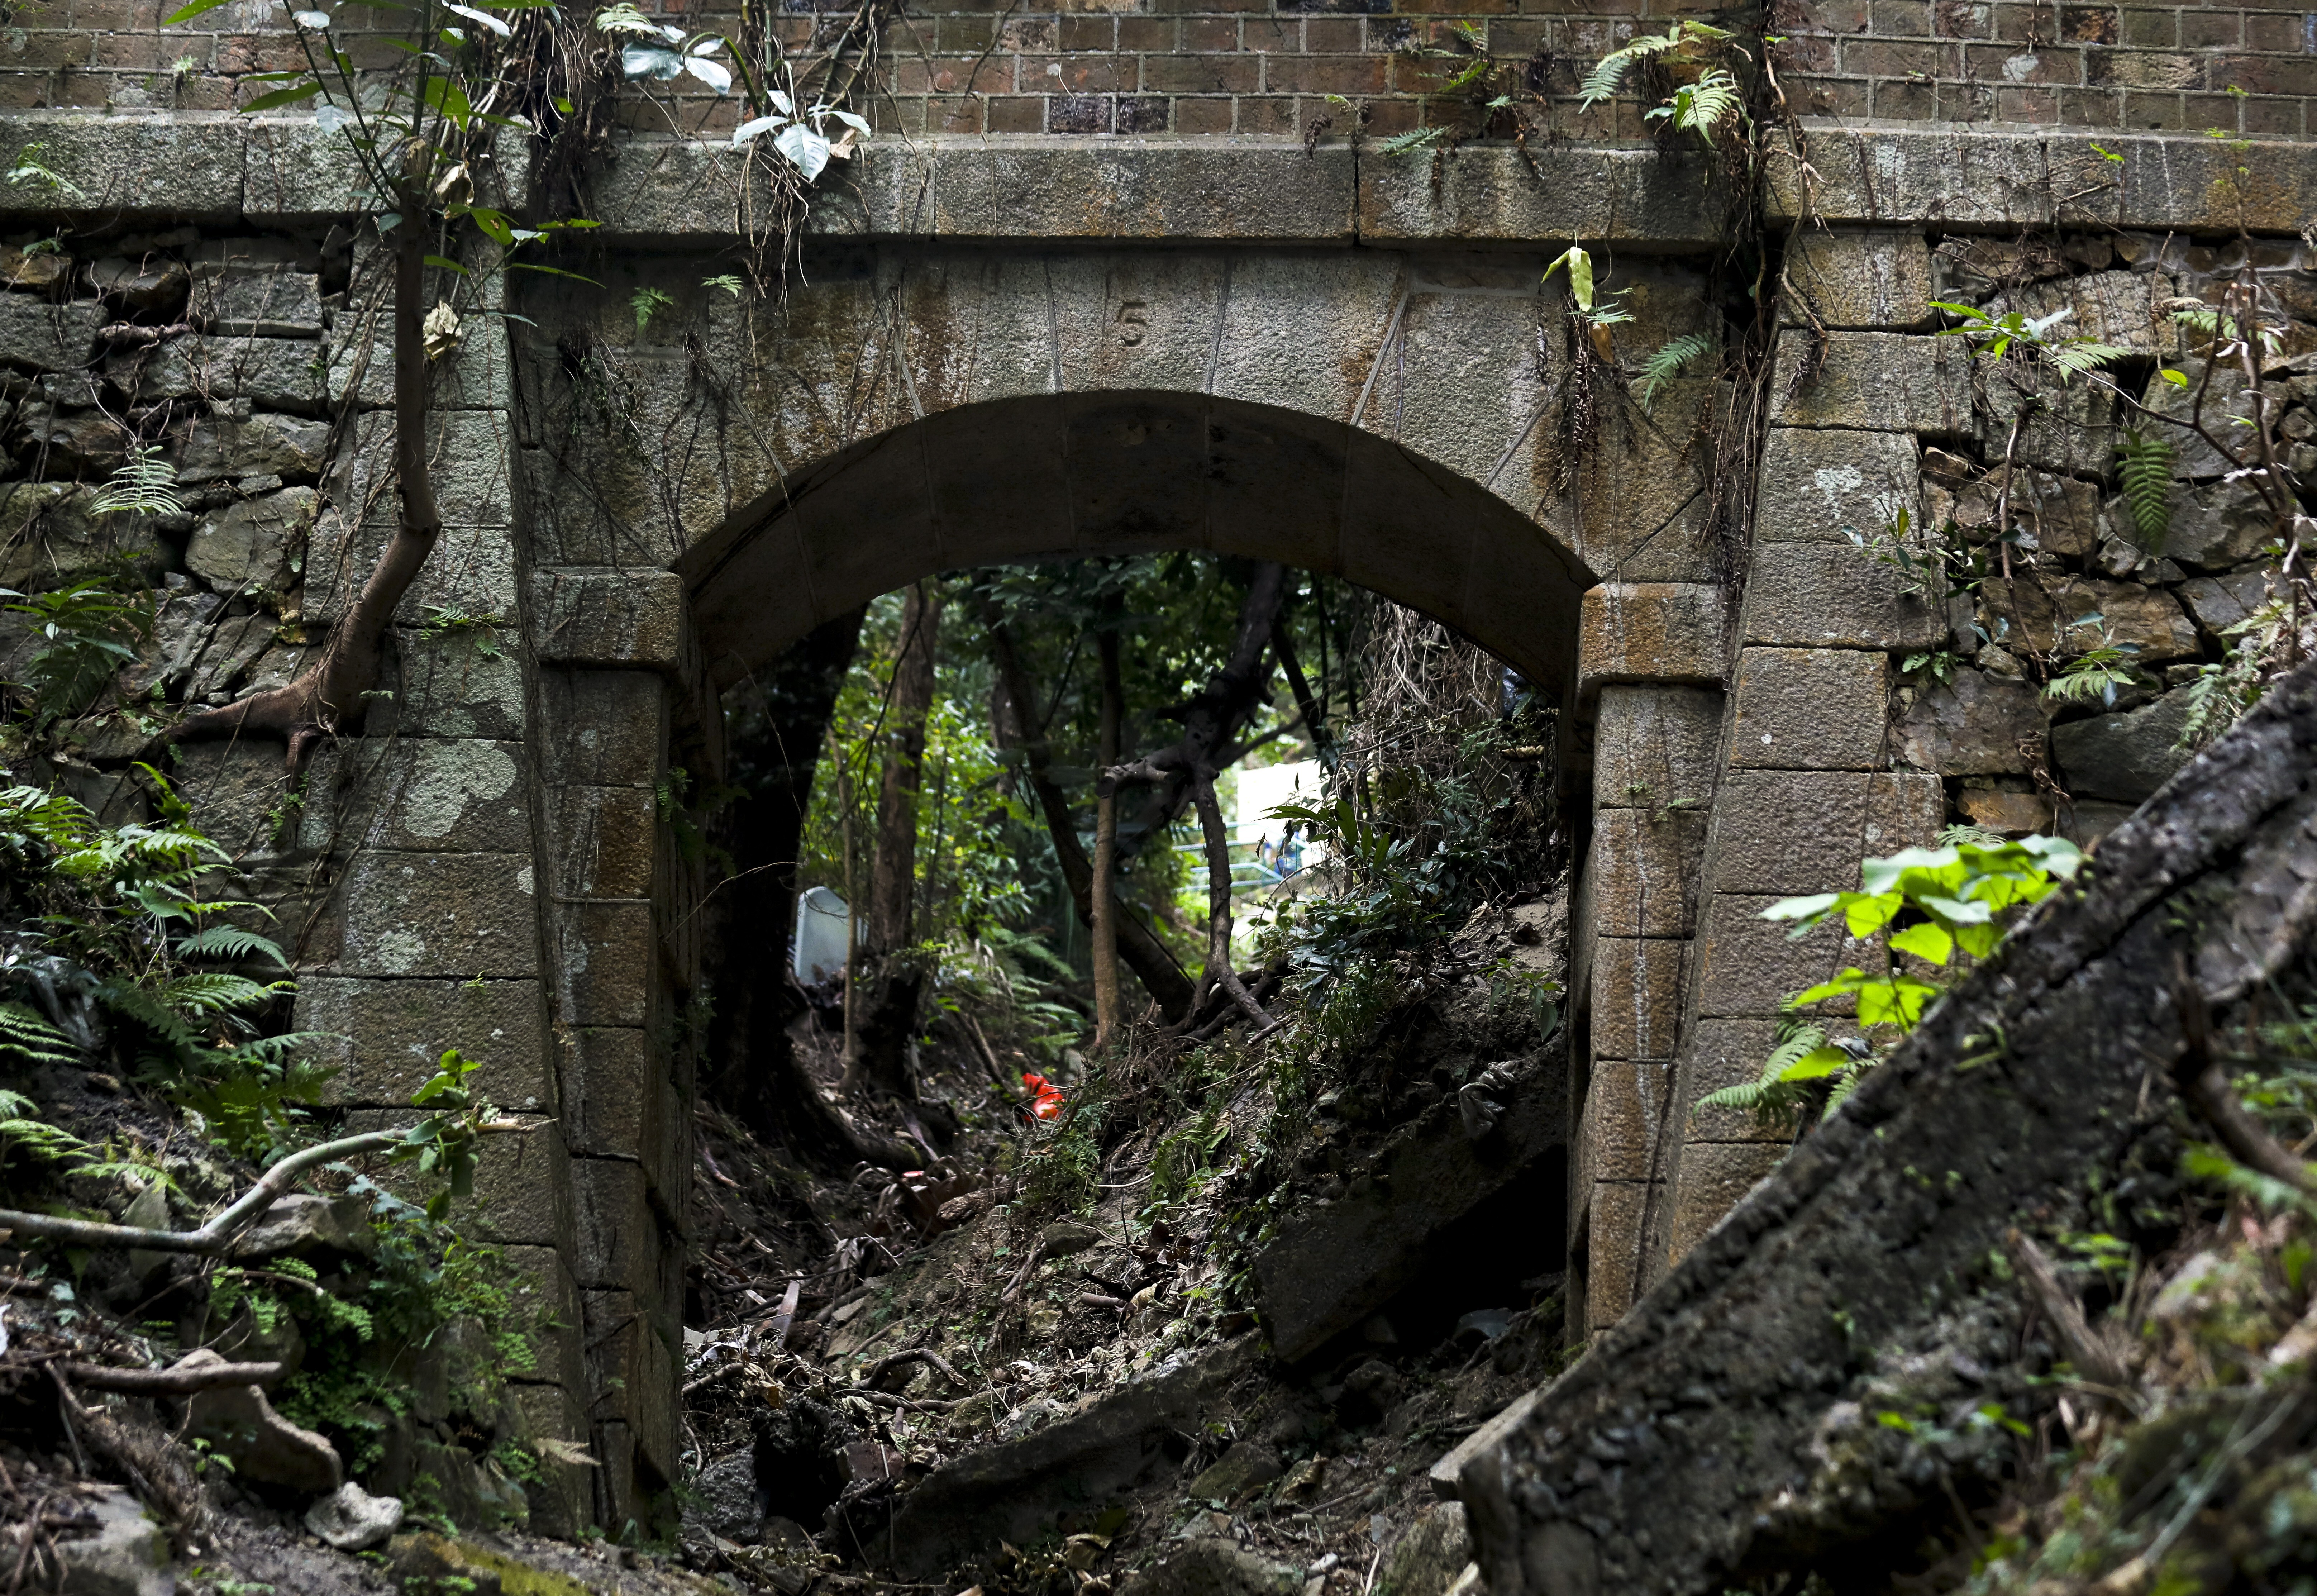 A section, marked No 5, of the Pok Fu Lam Conduit. Photo: Xiaomei Chen